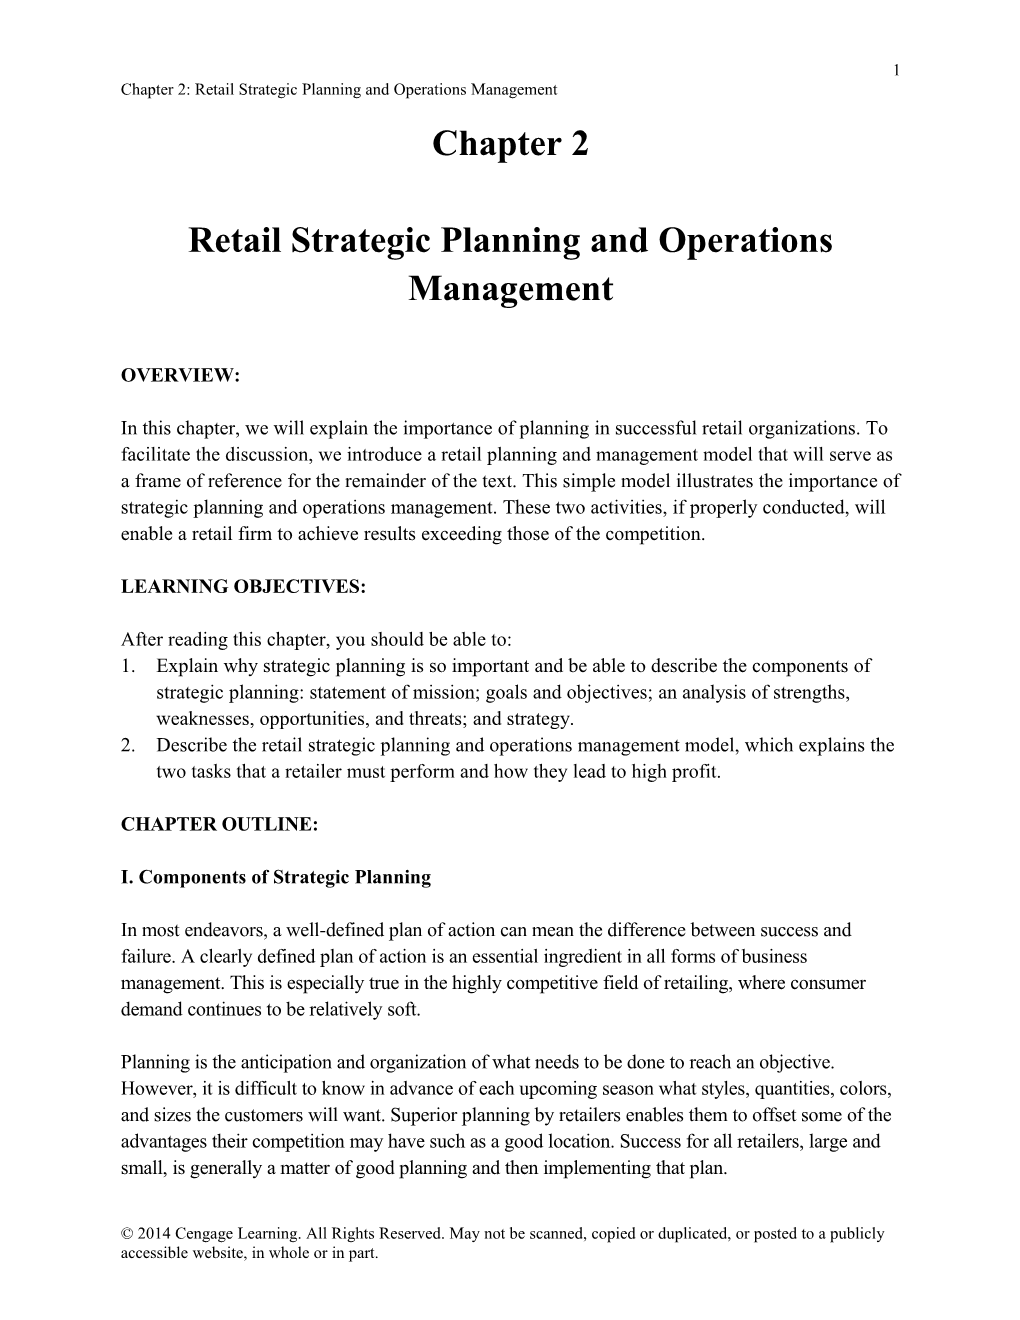 Retail Strategic Planning and Operations Management